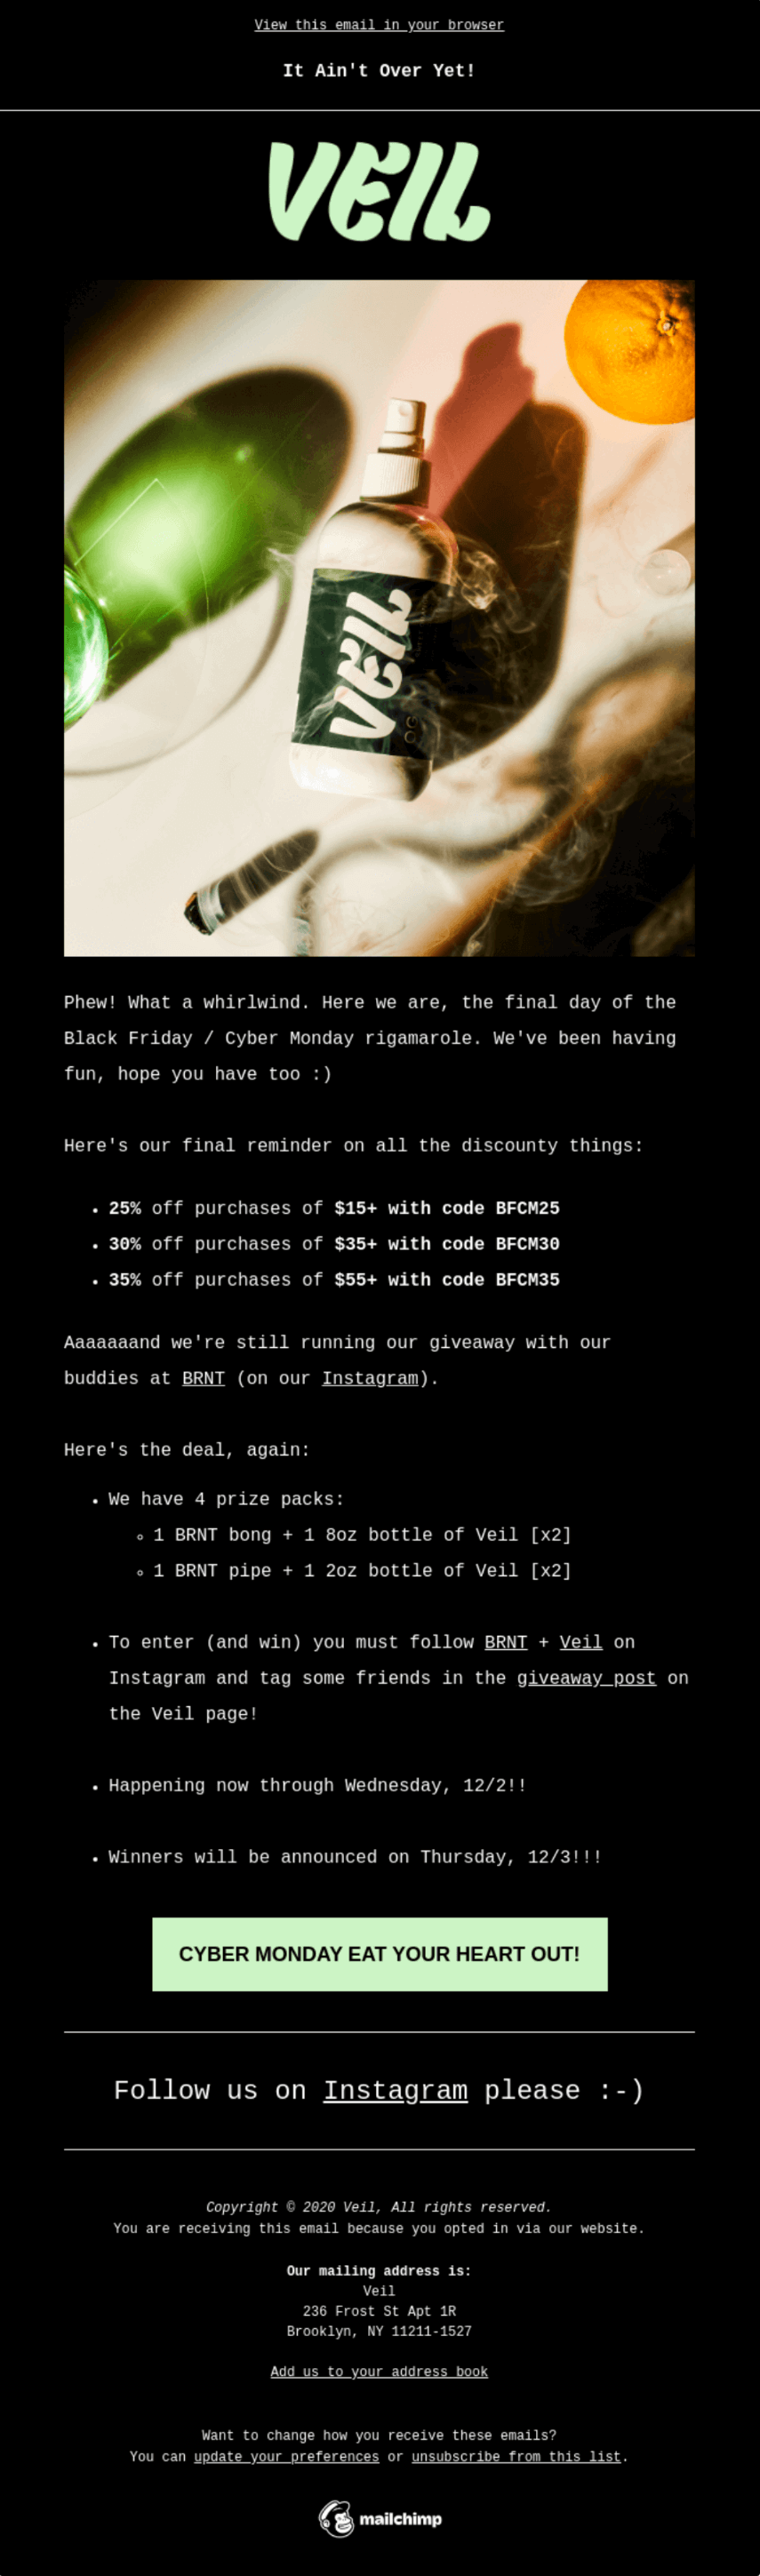 Black Friday email from Veil with a minimalistic, retro-feeling design